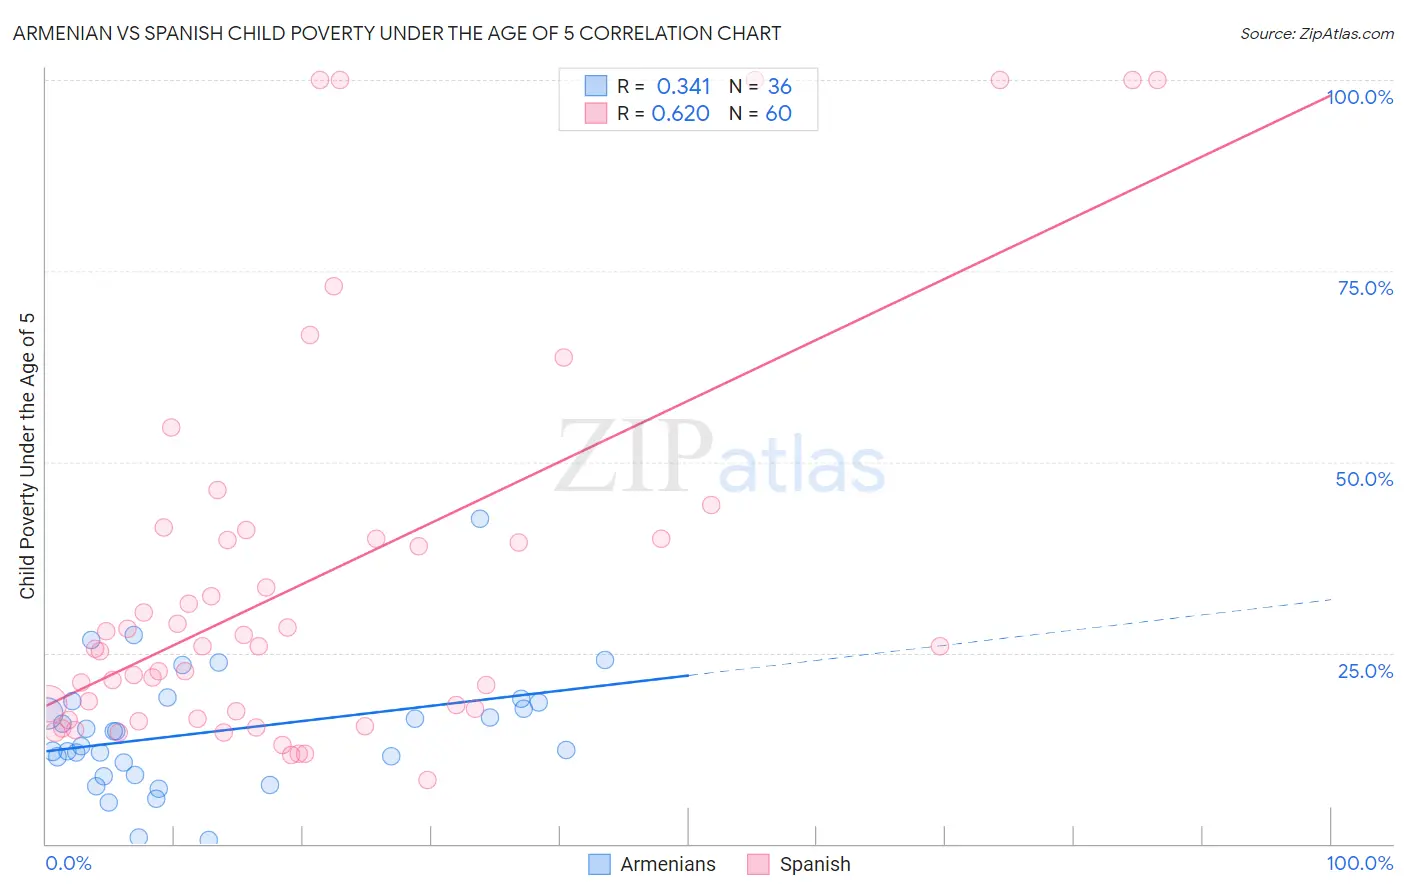 Armenian vs Spanish Child Poverty Under the Age of 5